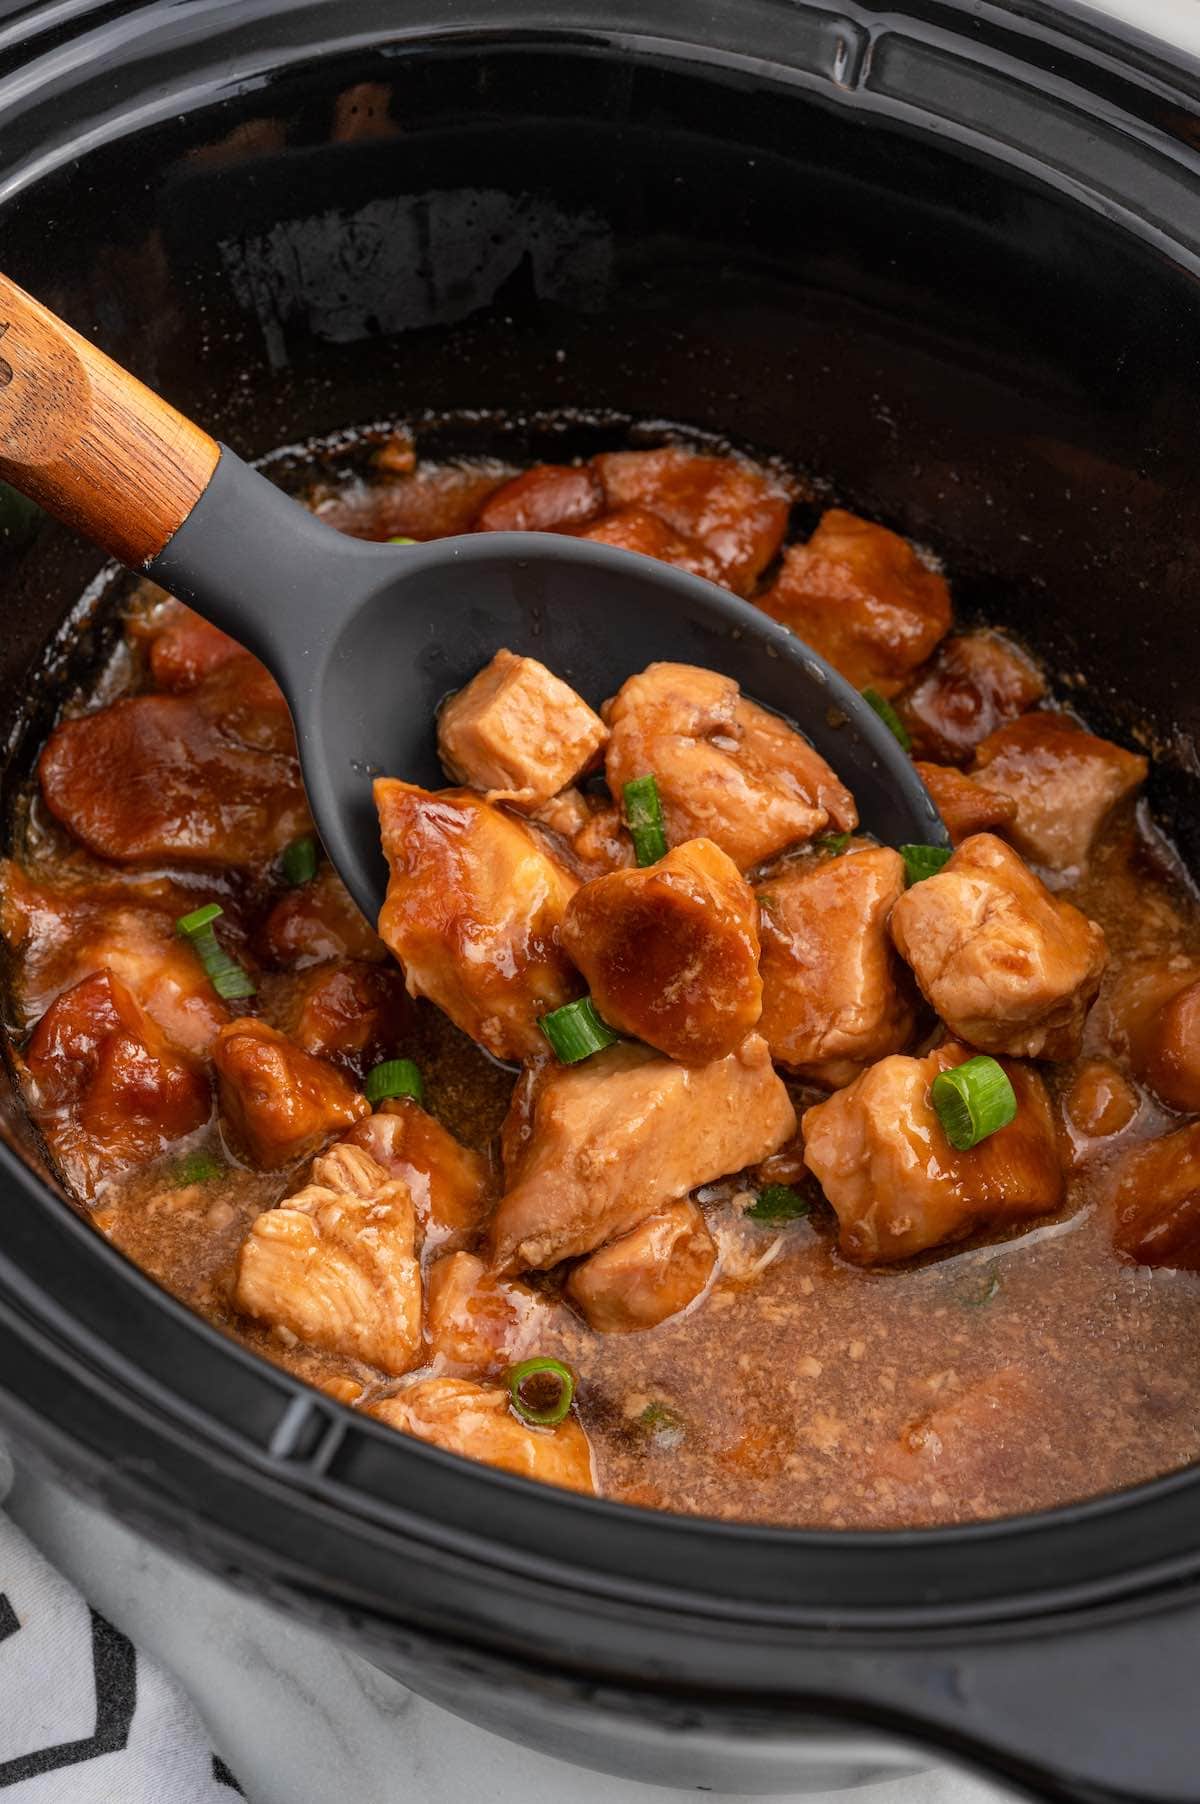 using a ladle to take heaps amount of Sweet Hawaiian Chicken from slow cooker.